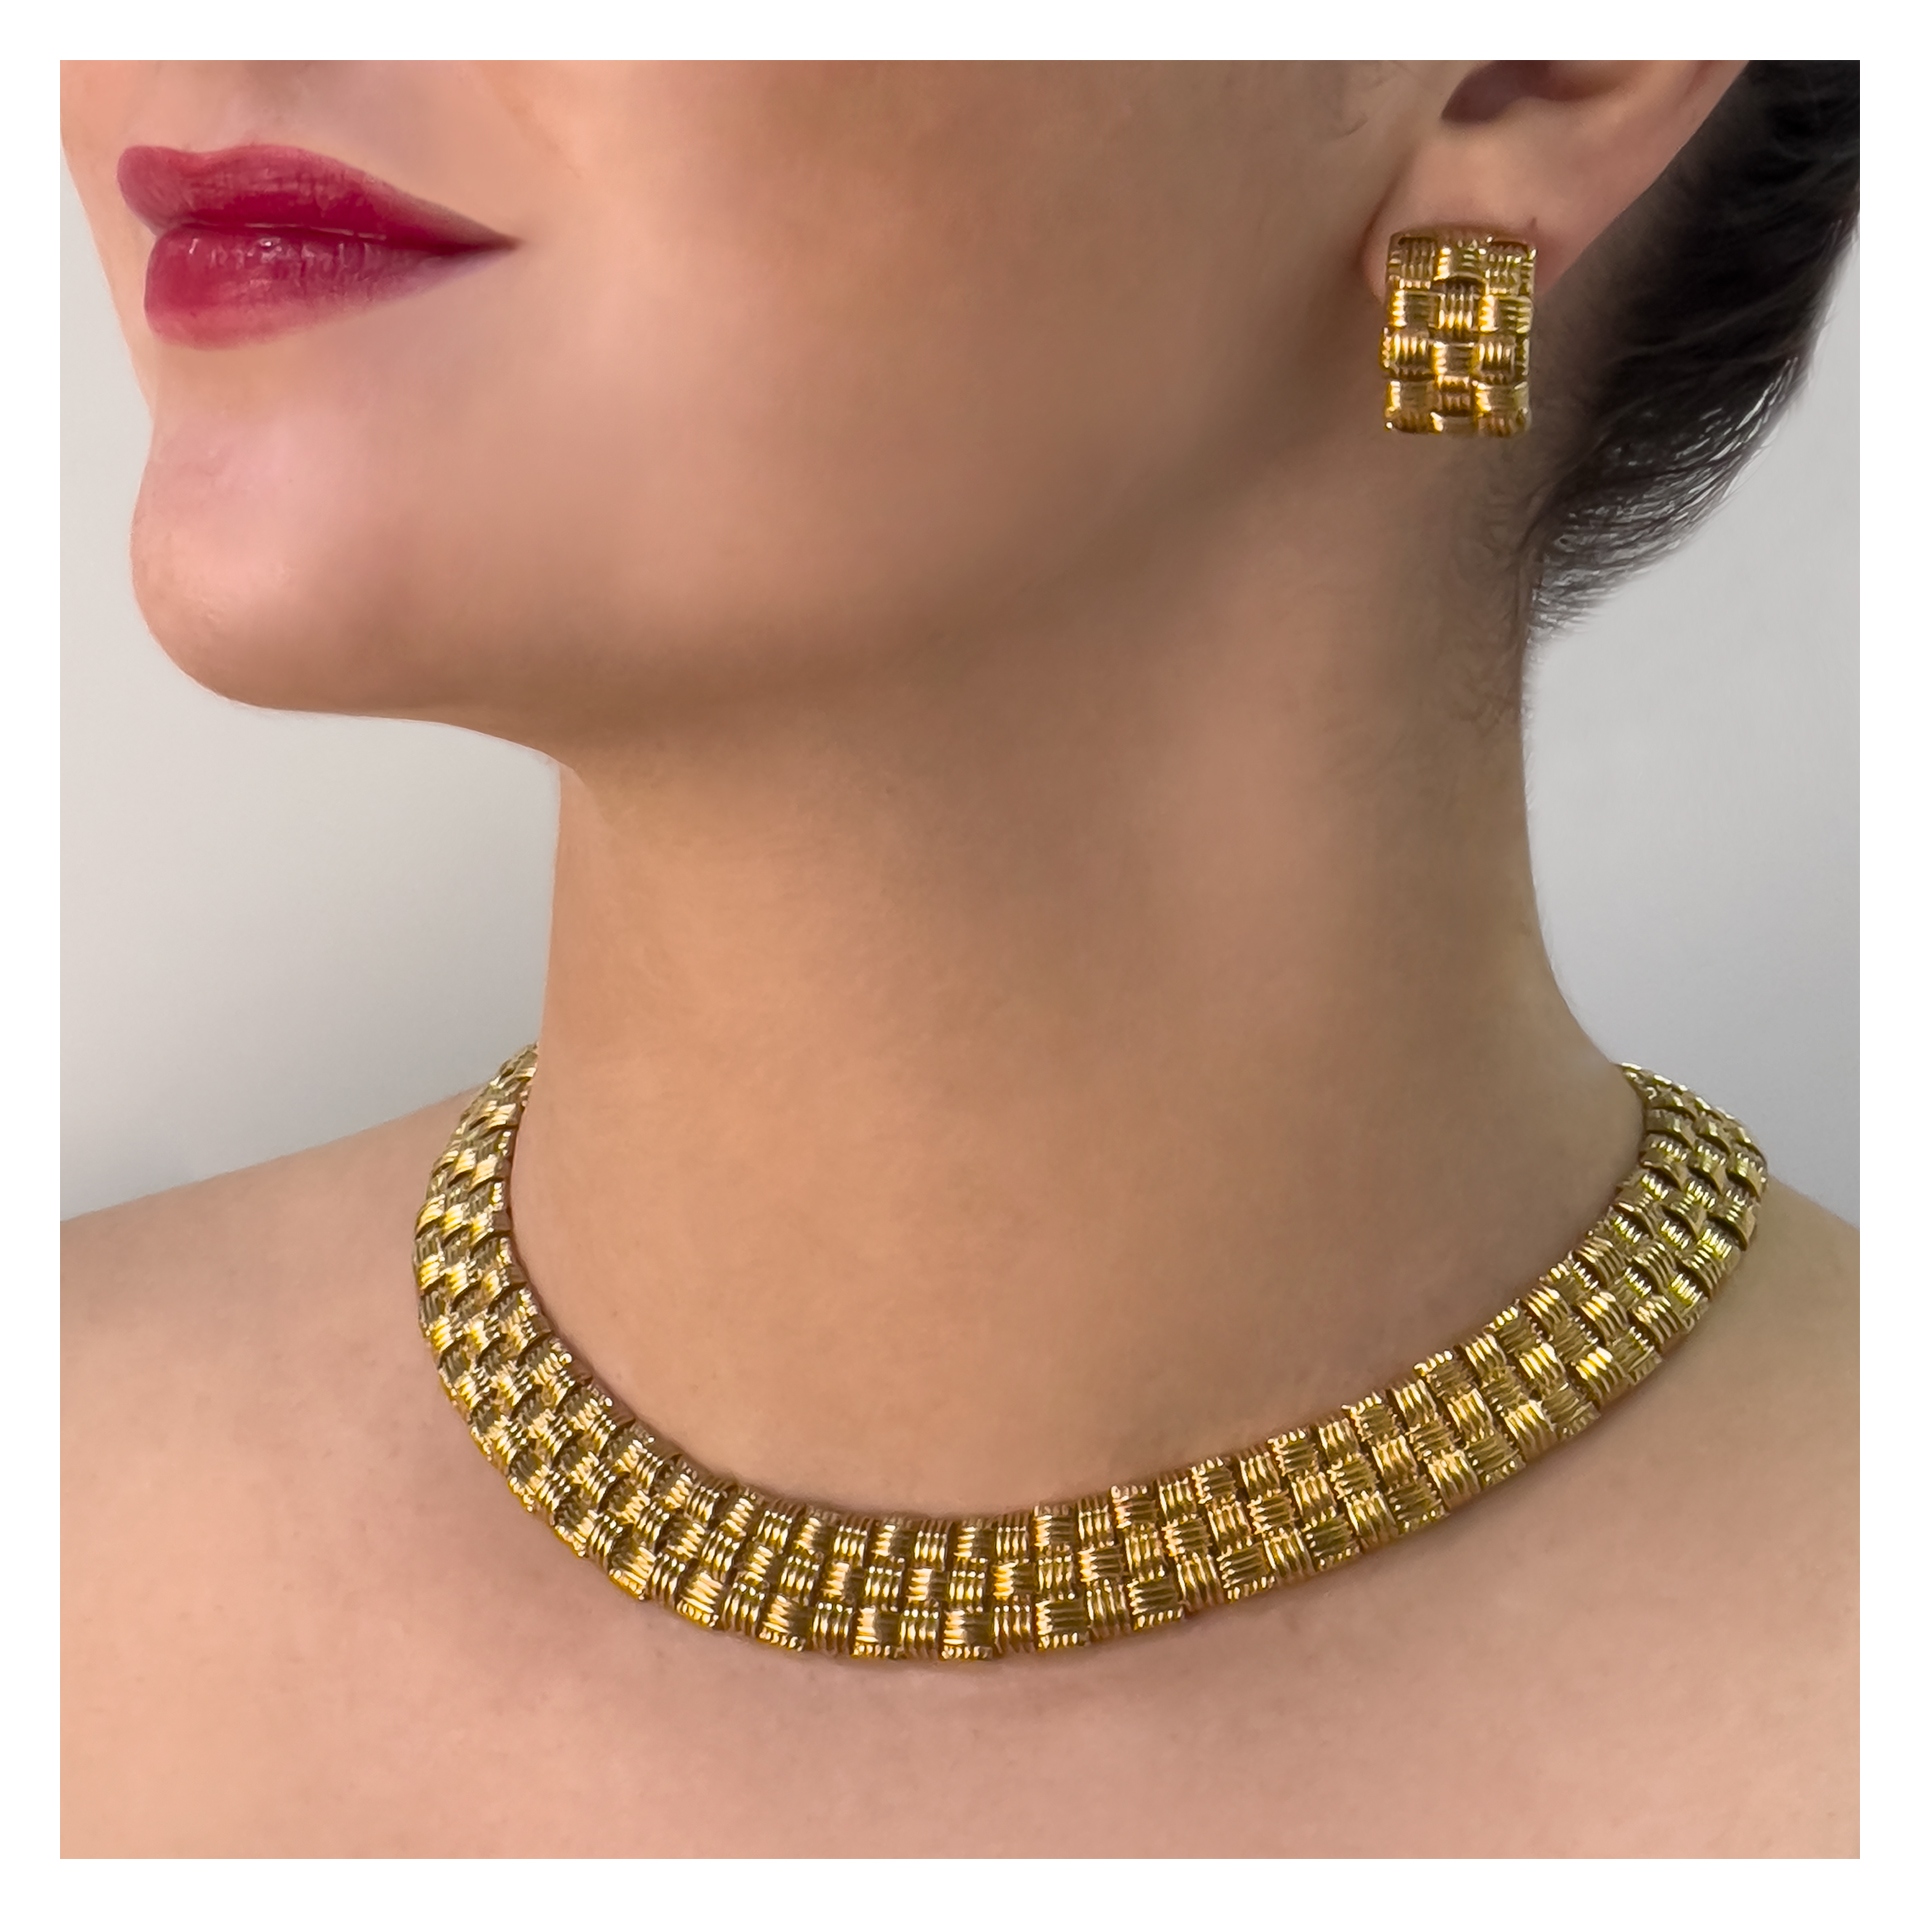 Roberto Coin Appassionata earrings and necklace set in 18k yellow gold